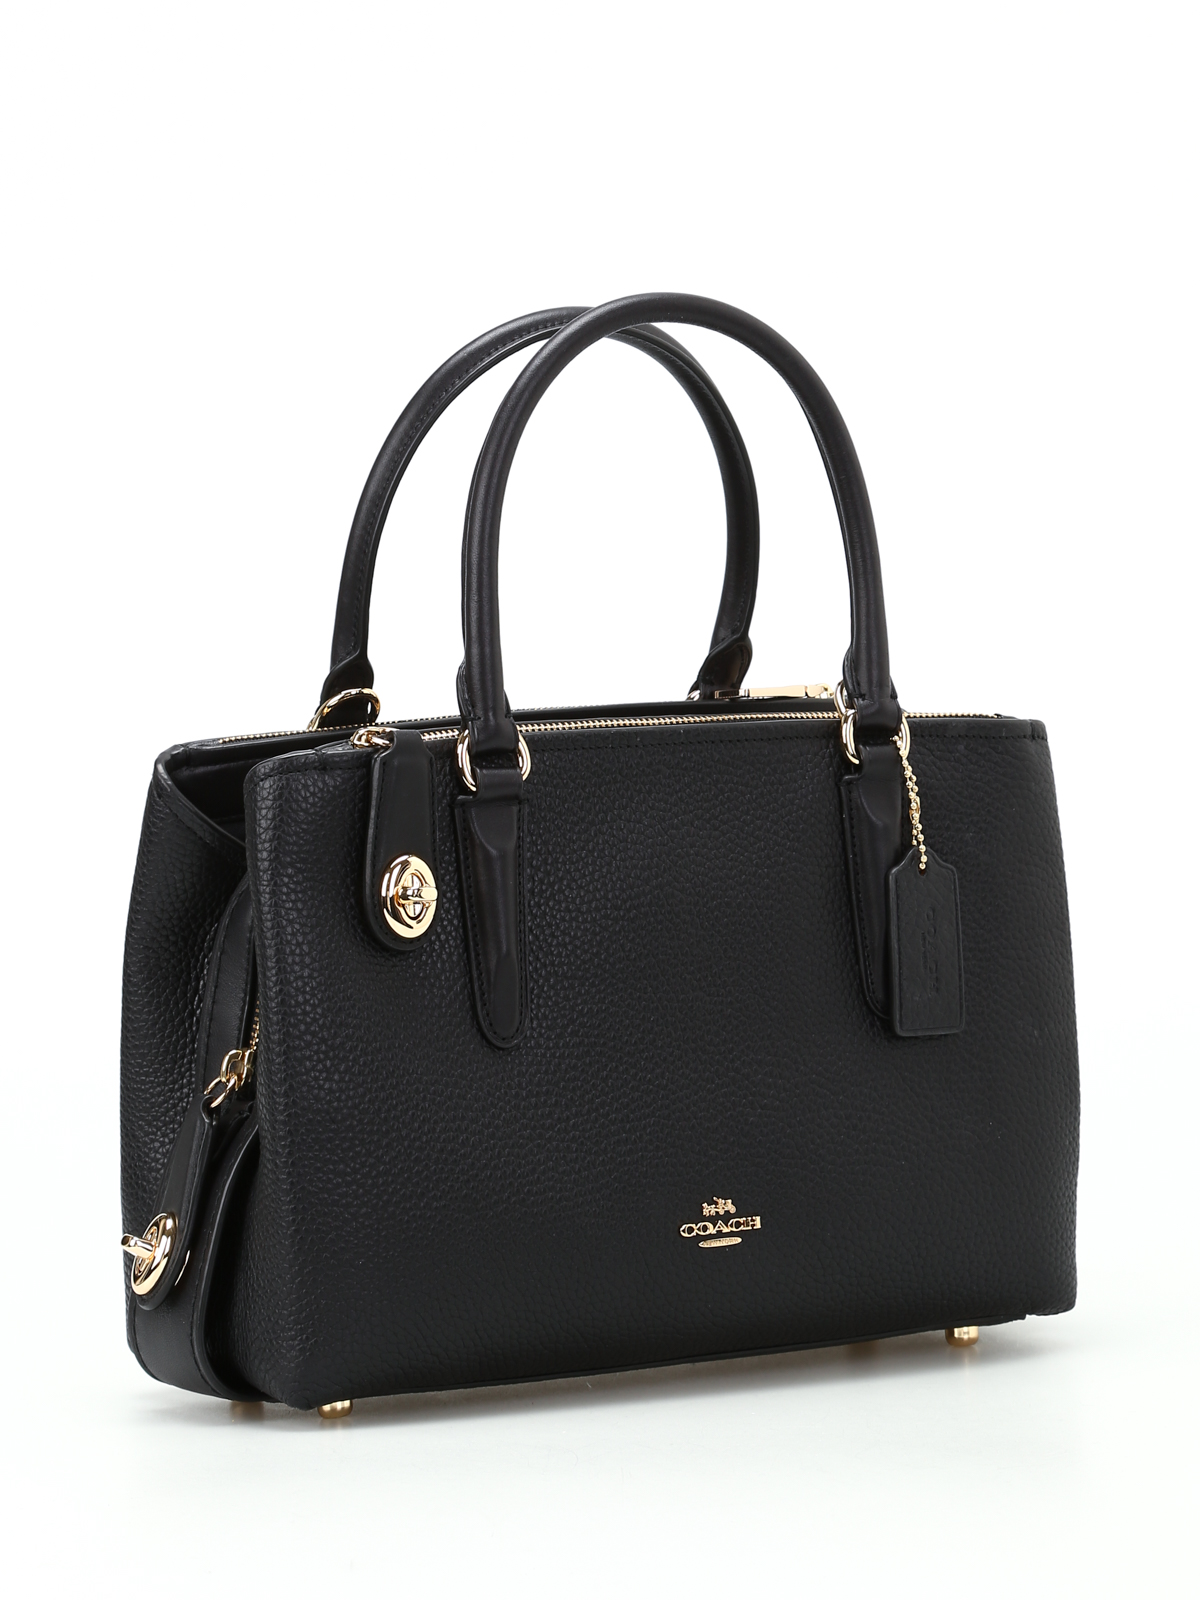 Bowling bags Coach - Brooklyn 28 black leather tote - 56839LIBLK